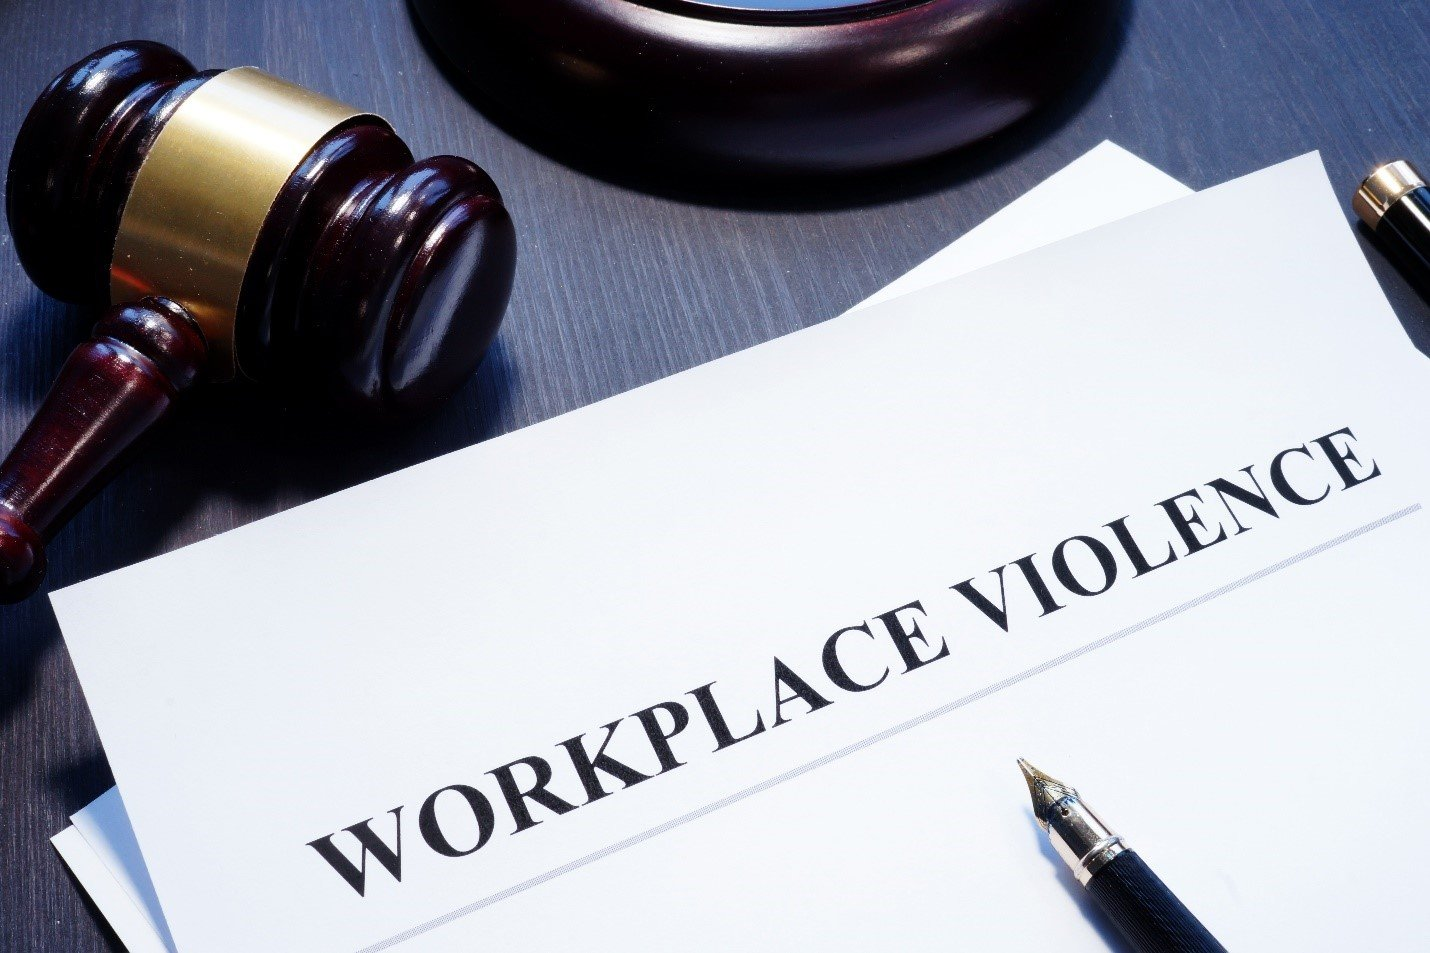 Document about Workplace Violence in a courtroom